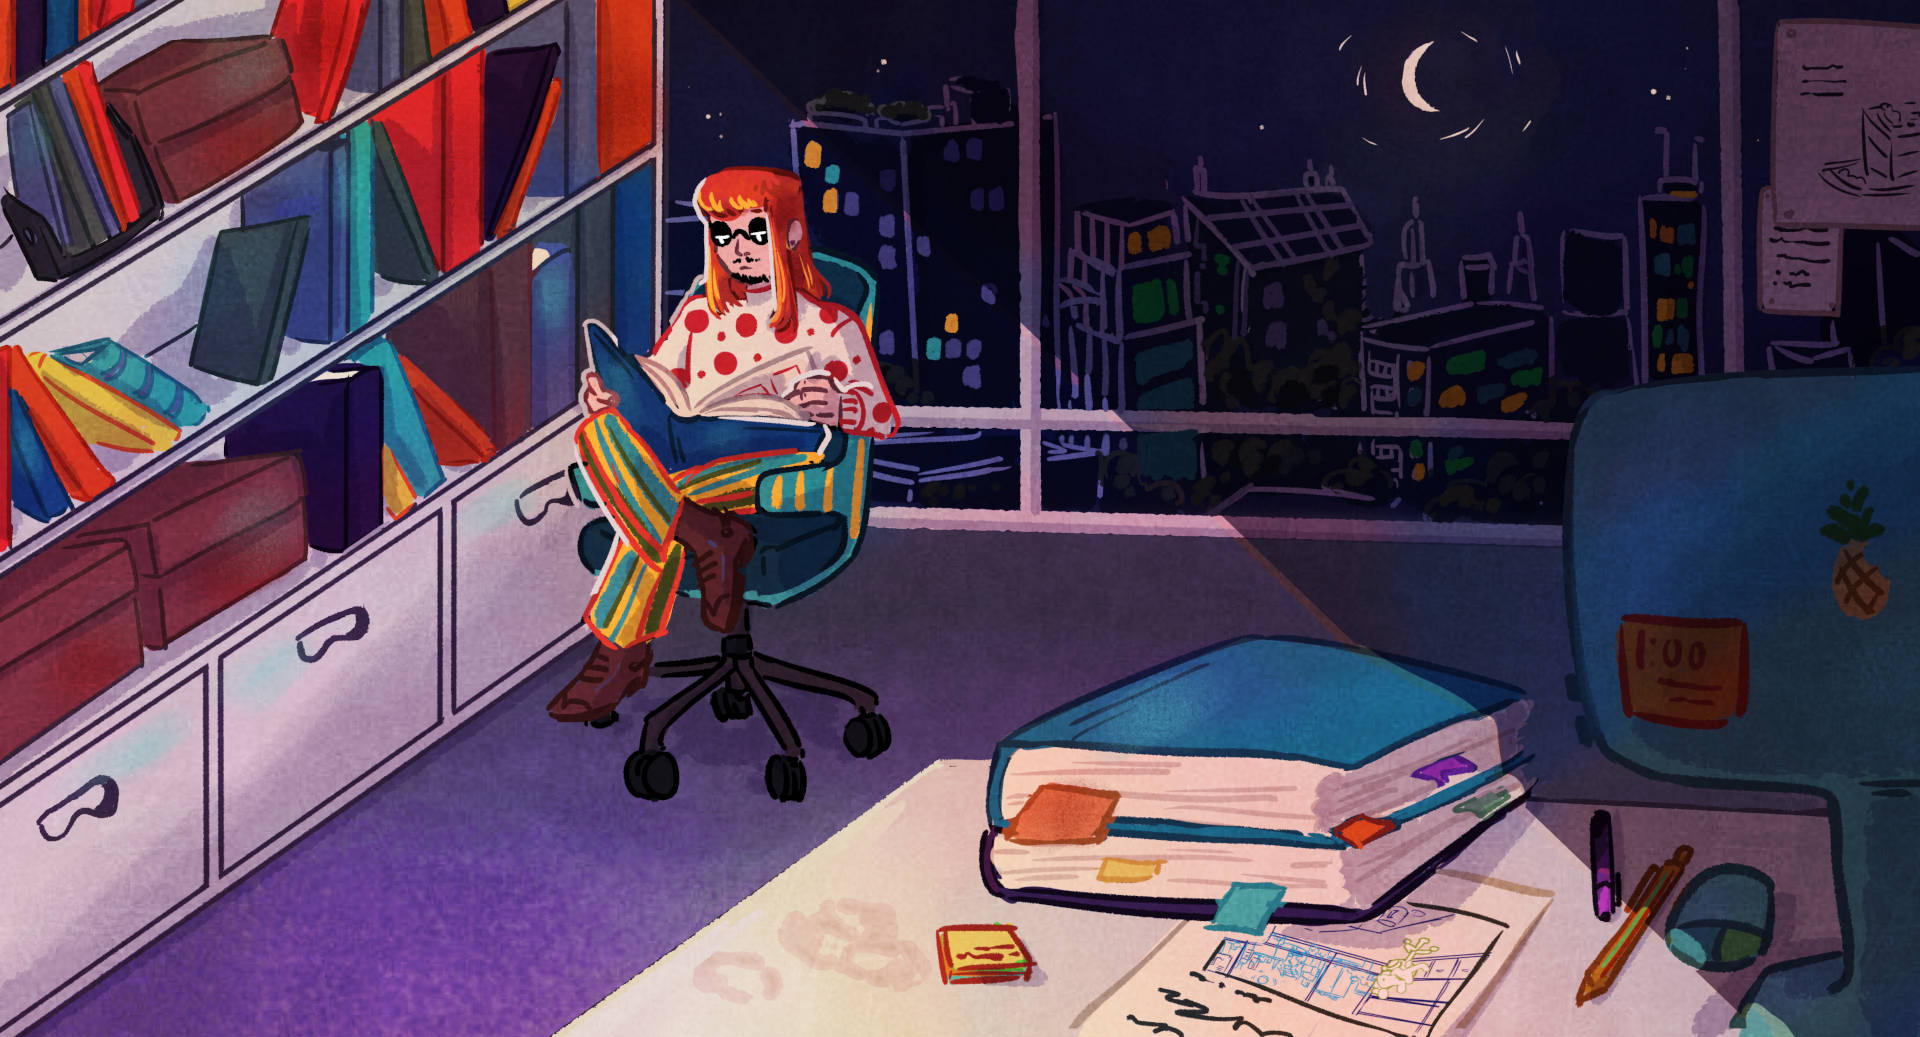 an illustration of a nightime office with large windows showing a city. There is one architect still working, they've rolled their office chair over to a shelf and pulled a book down to read though.